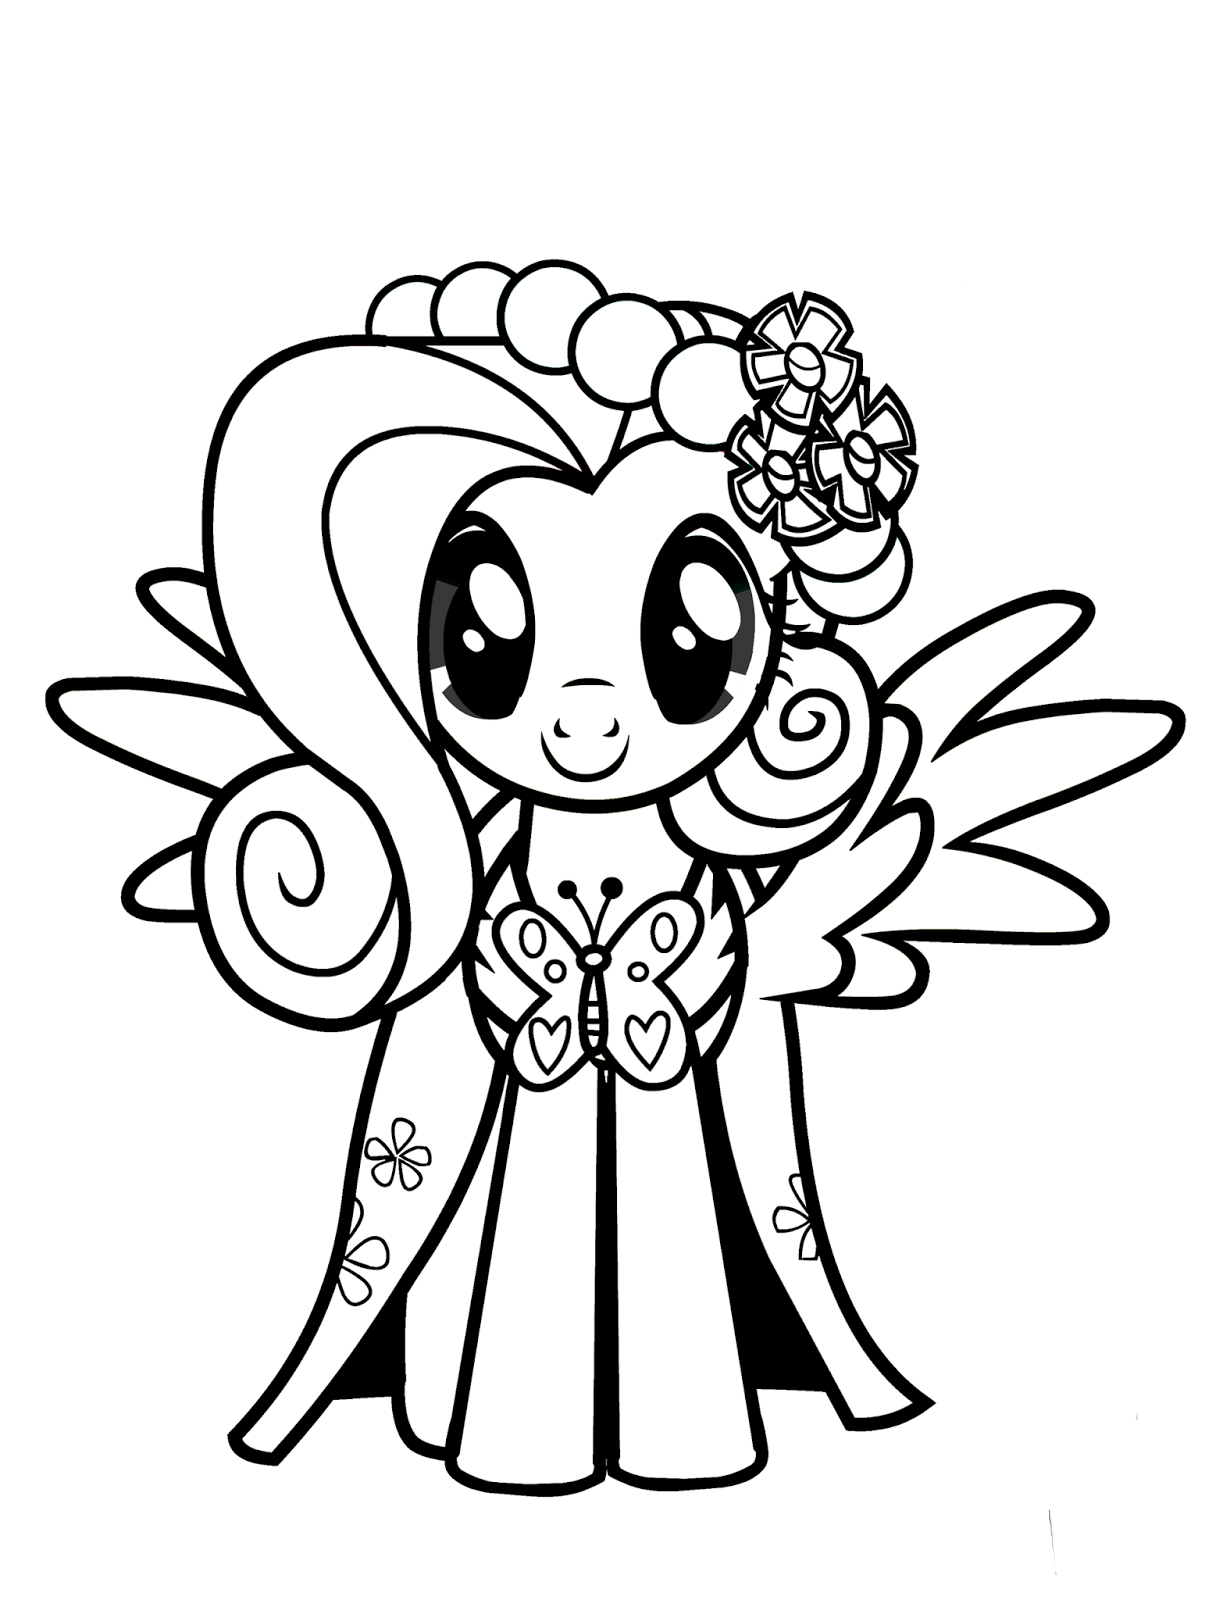 Download Fluttershy Coloring Pages - Best Coloring Pages For Kids